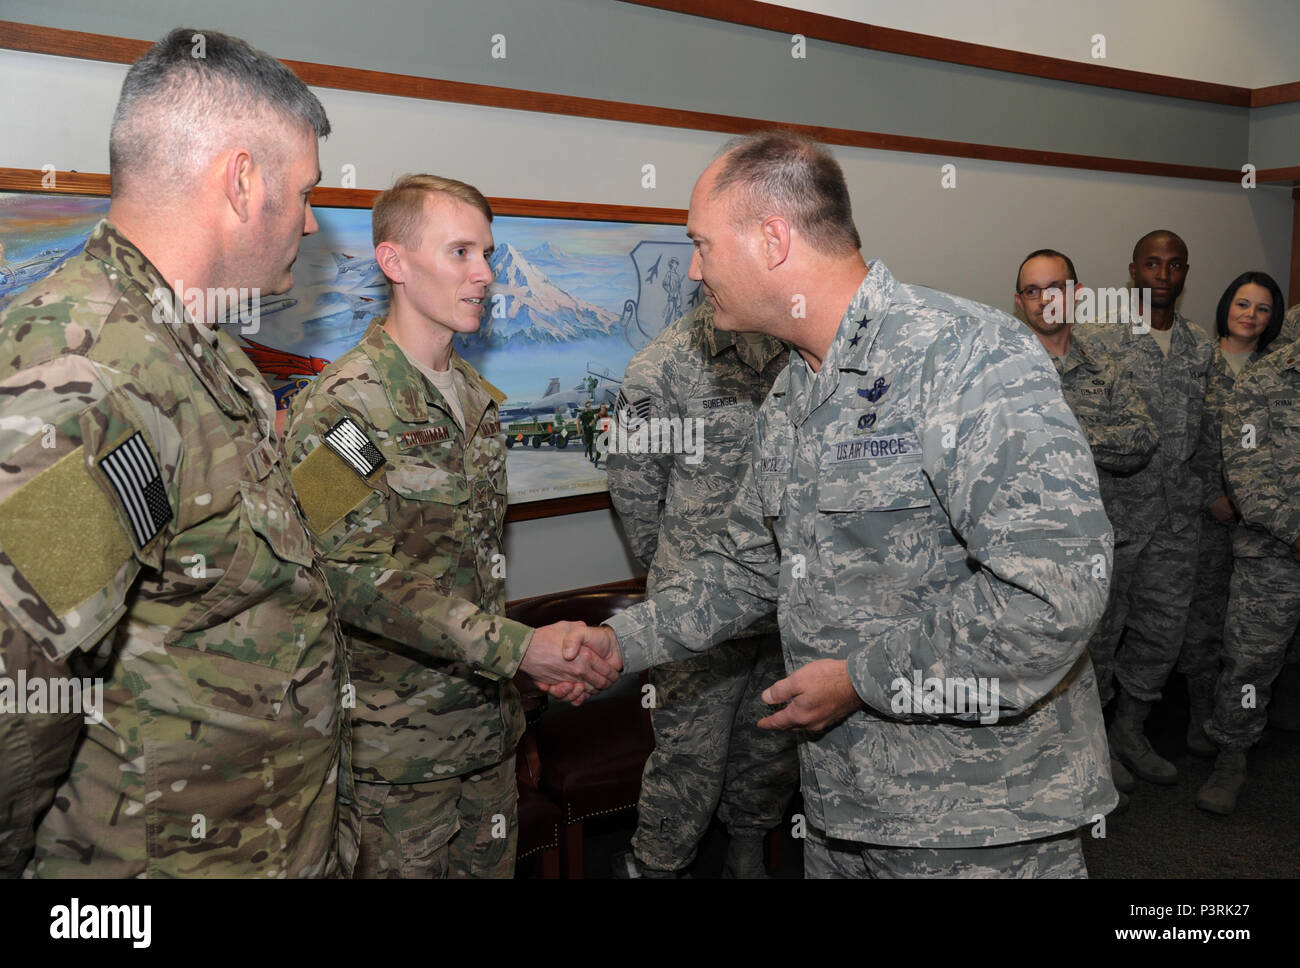 Staff Sgt. Christopher Couchman, assigned to the 125th STS, 142nd Fighter Wing Is ‘Coined’ by Maj. Gen. Michael Stencel, The Adjutant General of Oregon, as he recognizes select airmen for their recent accomplishments and diligence of duty, July 12, 2016, Portland Air National Guard Base, Ore. (U.S. Air National Guard photos by Tech. Sgt. John Hughel, 142nd Fighter Wing Public Affairs) Stock Photo